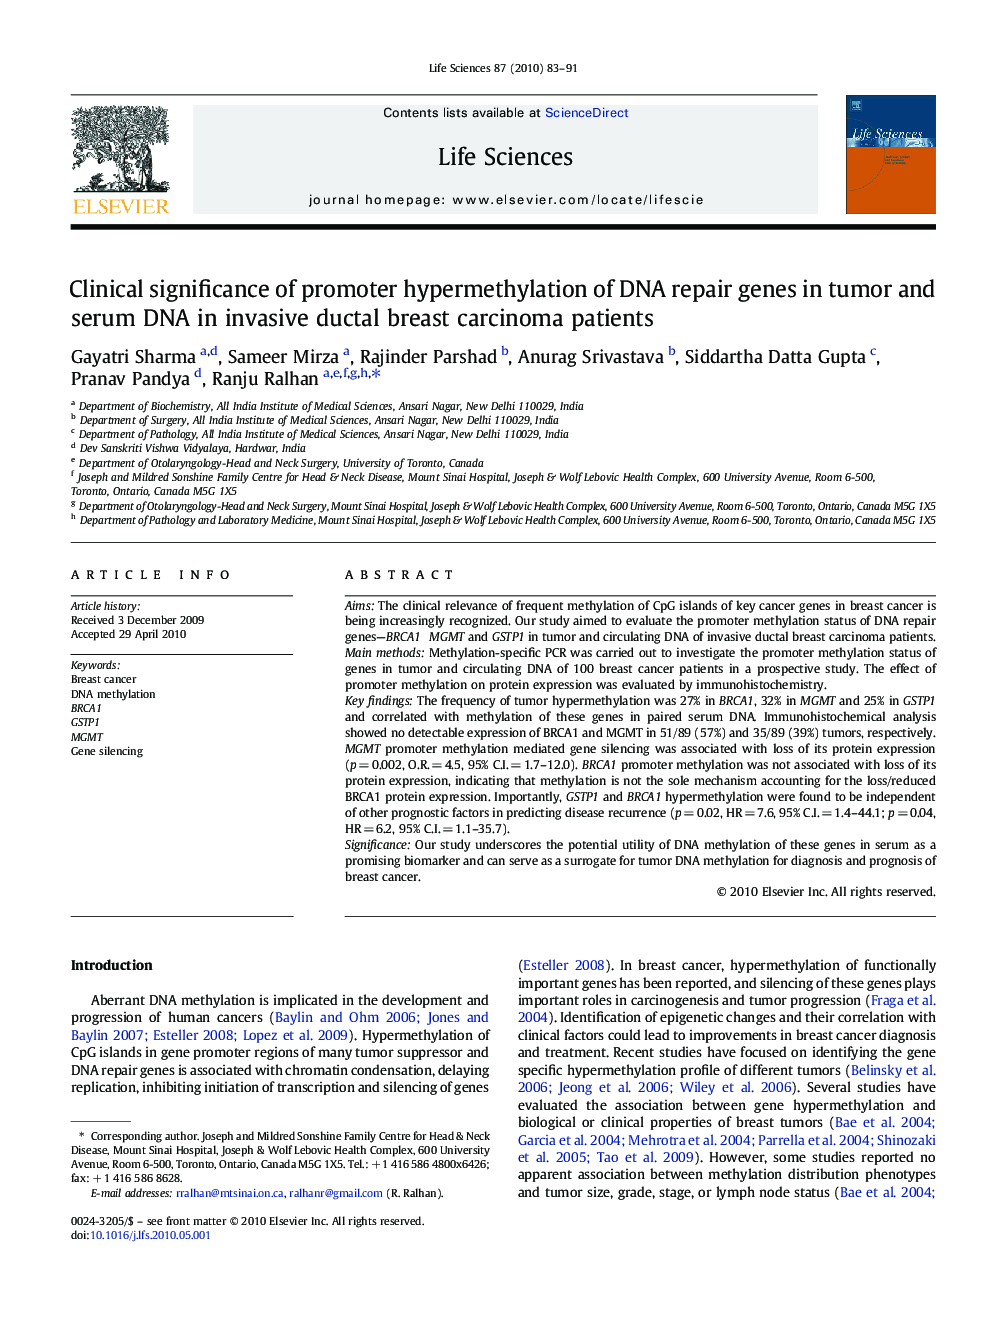 Clinical significance of promoter hypermethylation of DNA repair genes in tumor and serum DNA in invasive ductal breast carcinoma patients